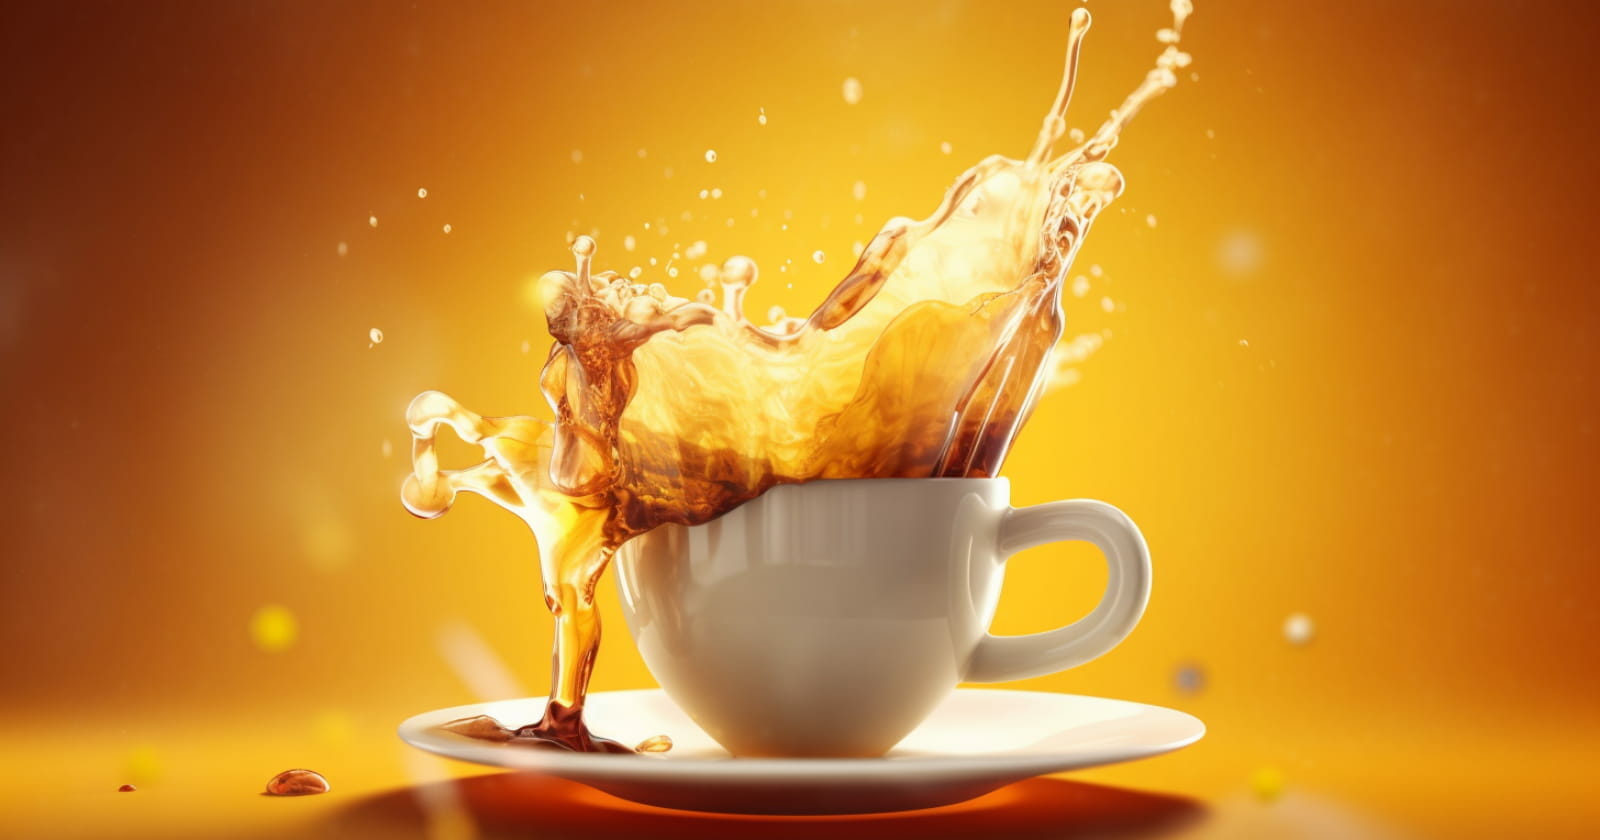 Coffee being splashed out of a cup of coffee